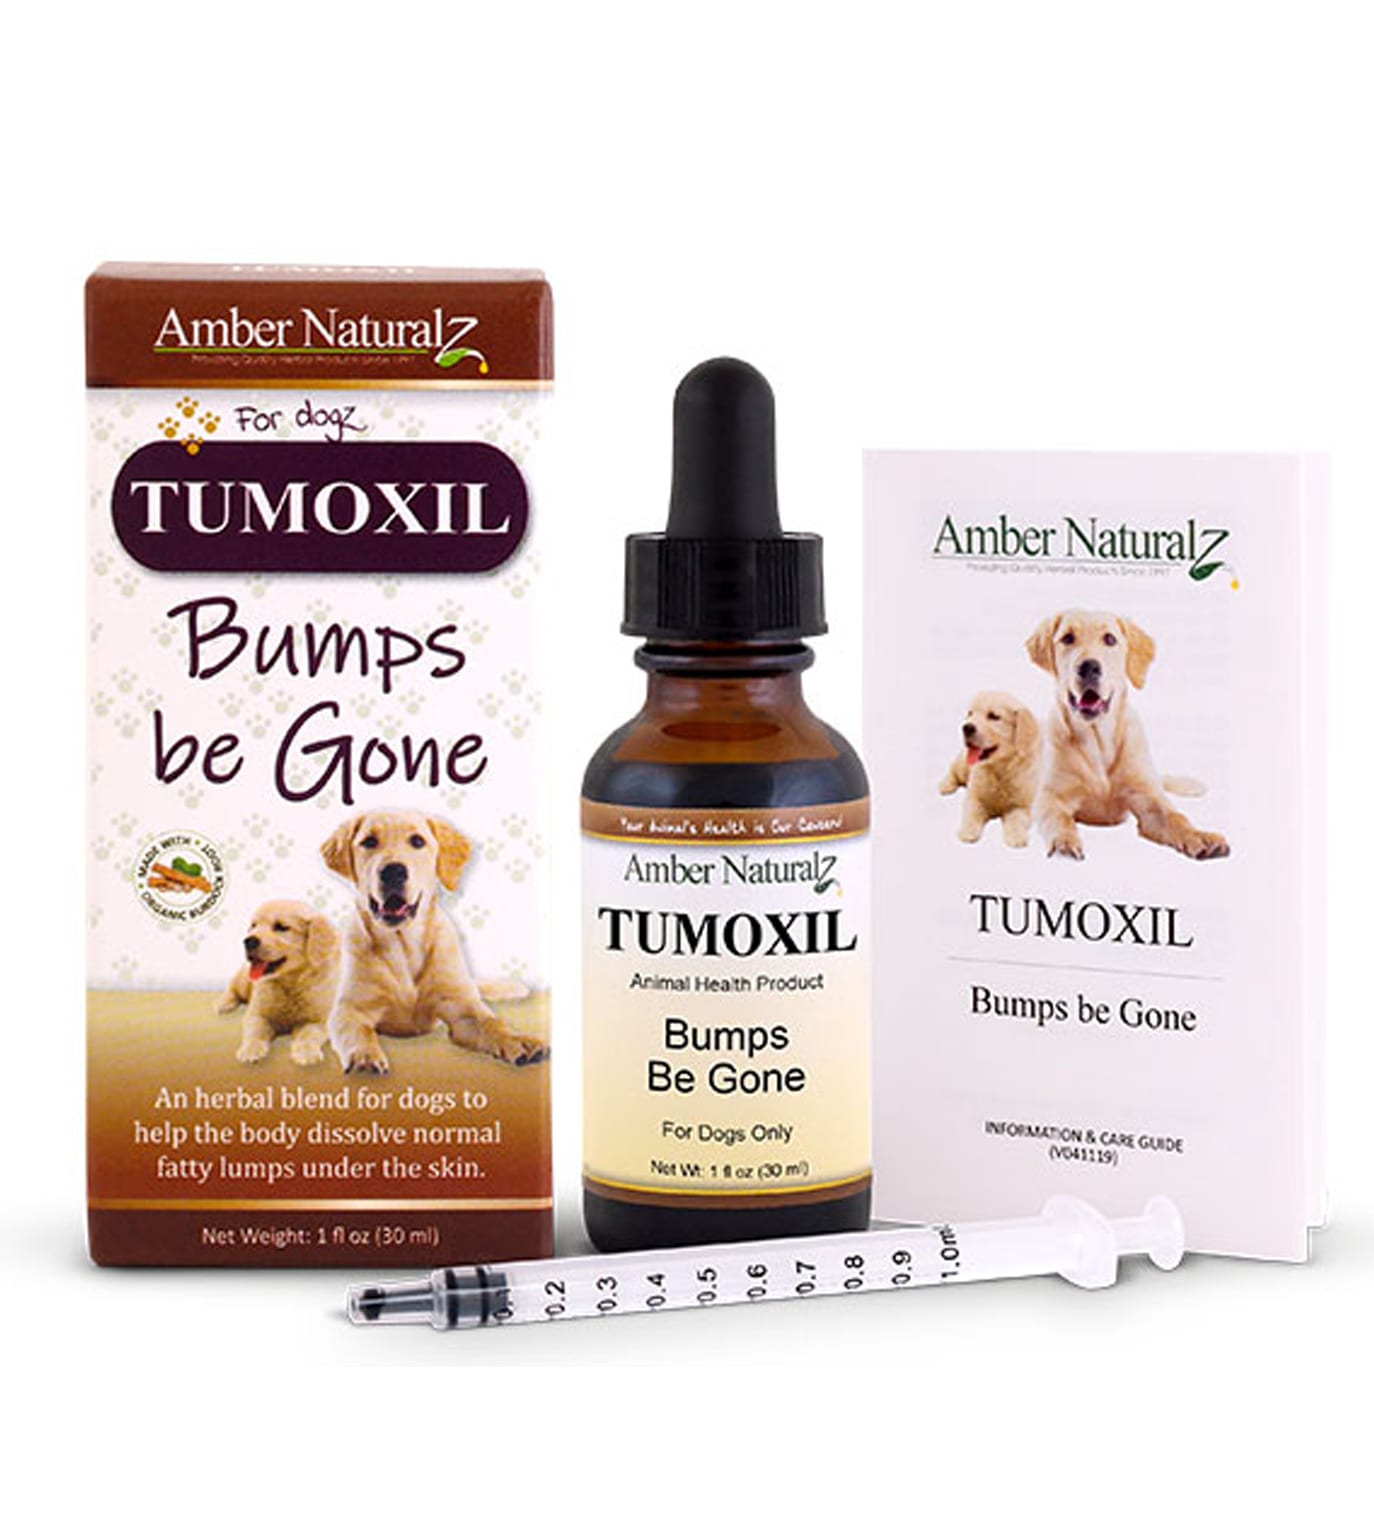 Amber Naturalz Tumoxil Bumps Be Gone for Dogs - Mooshiepets